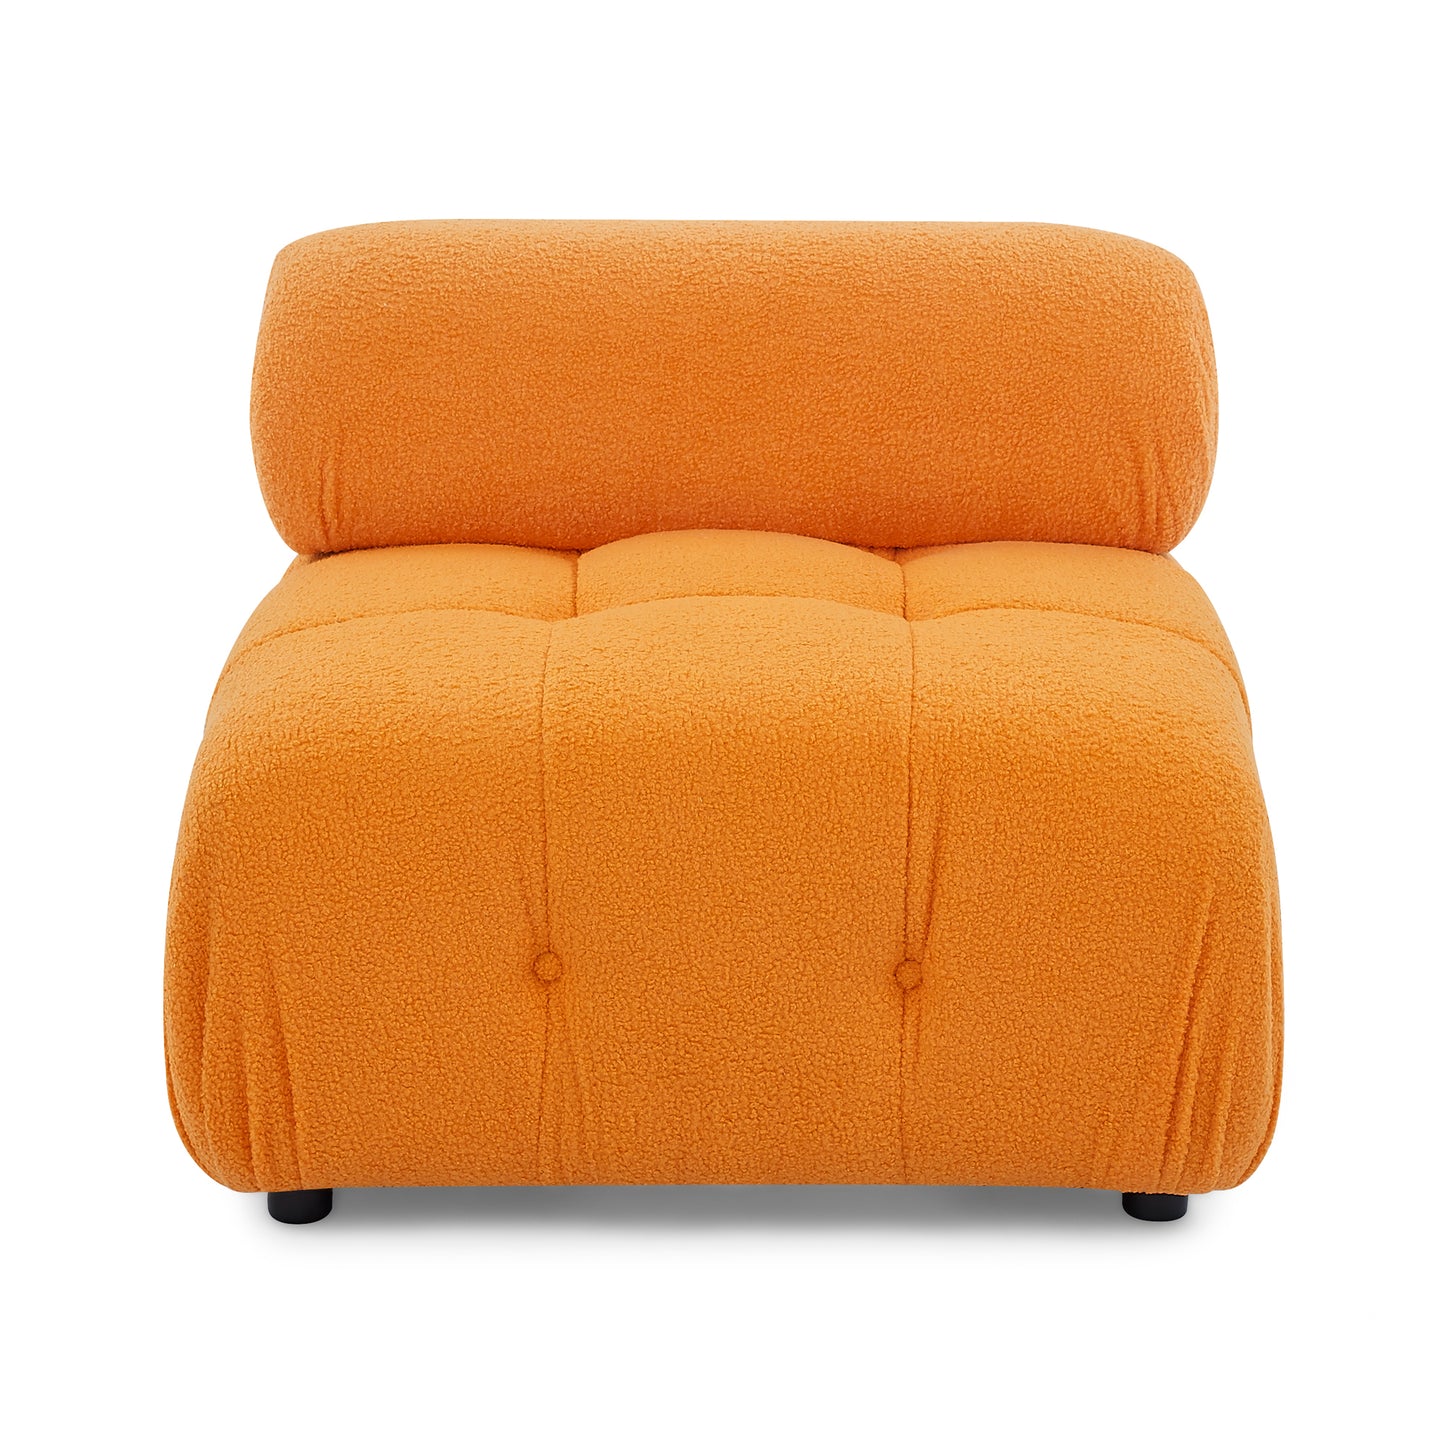 Modular Sectional Sofa, Button Tufted Designed and DIY Combination,L Shaped Couch with Reversible Ottoman, Orange Velvet